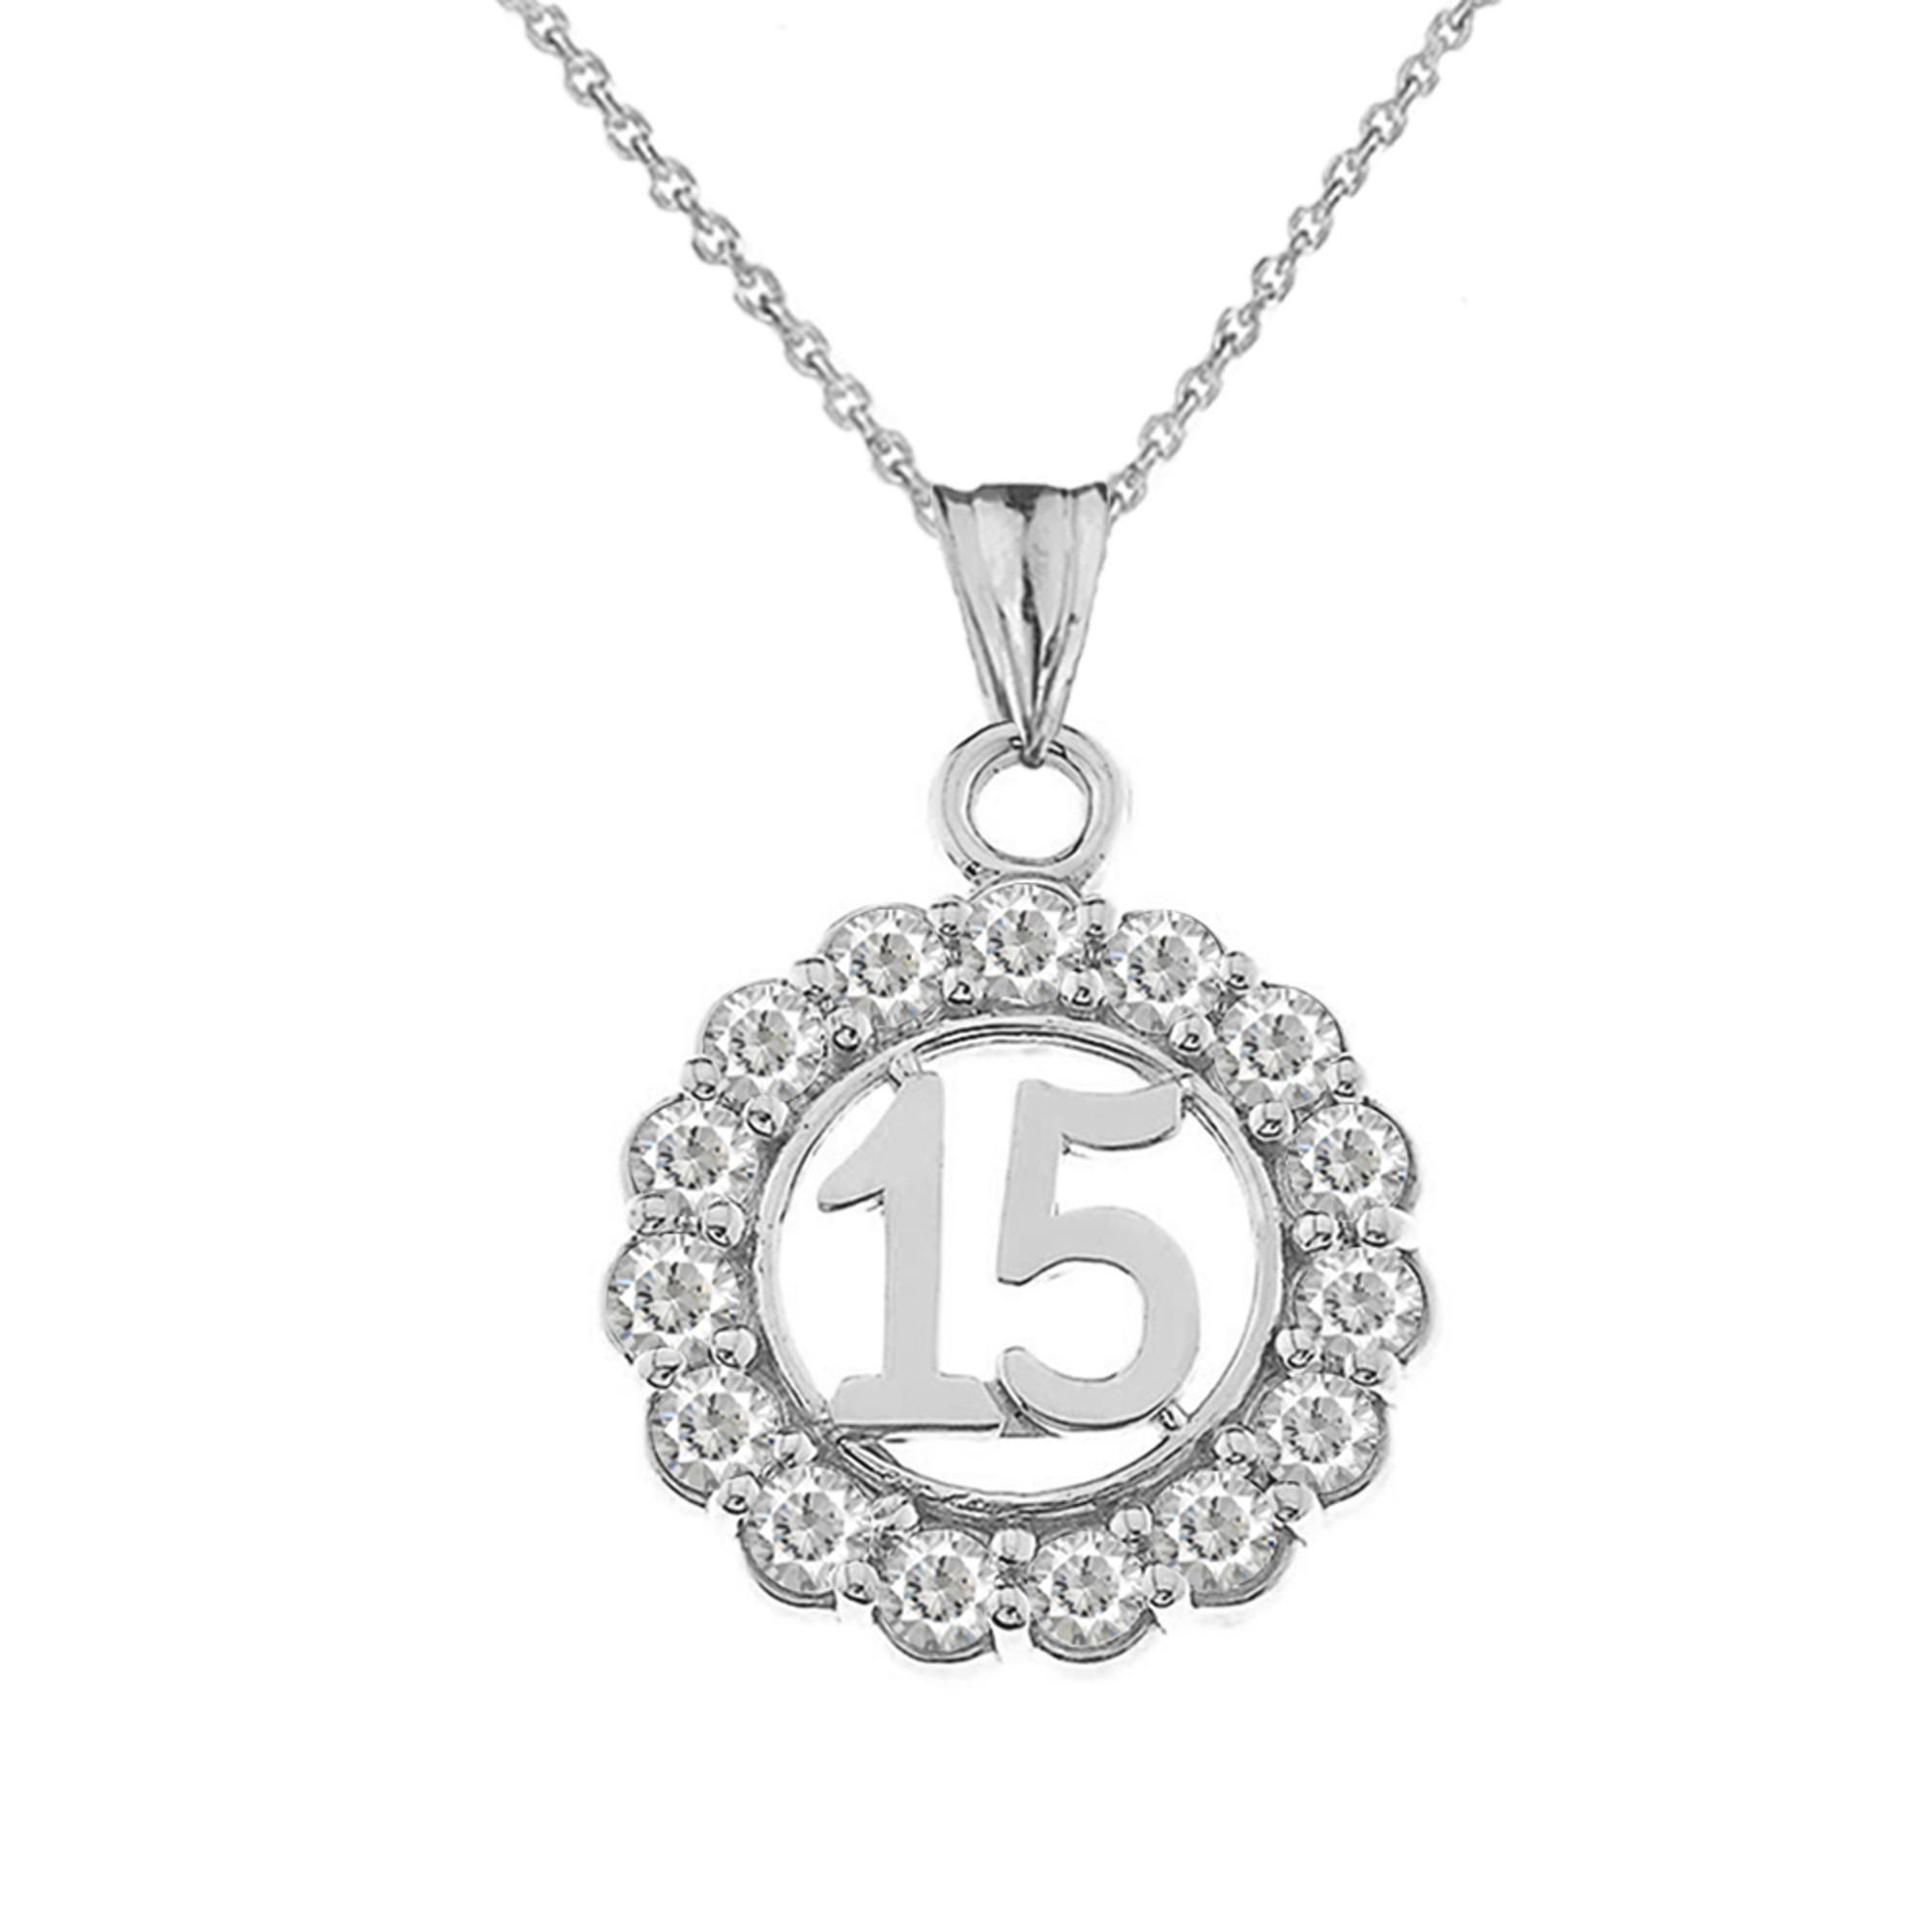 Infinity Collection Quinceanera Charm Necklace, Girls Sweet 15 Jewelry Gift  - Quinceanera Jewelry for Girls Fifteenth Birthday : Amazon.ca: Clothing,  Shoes & Accessories